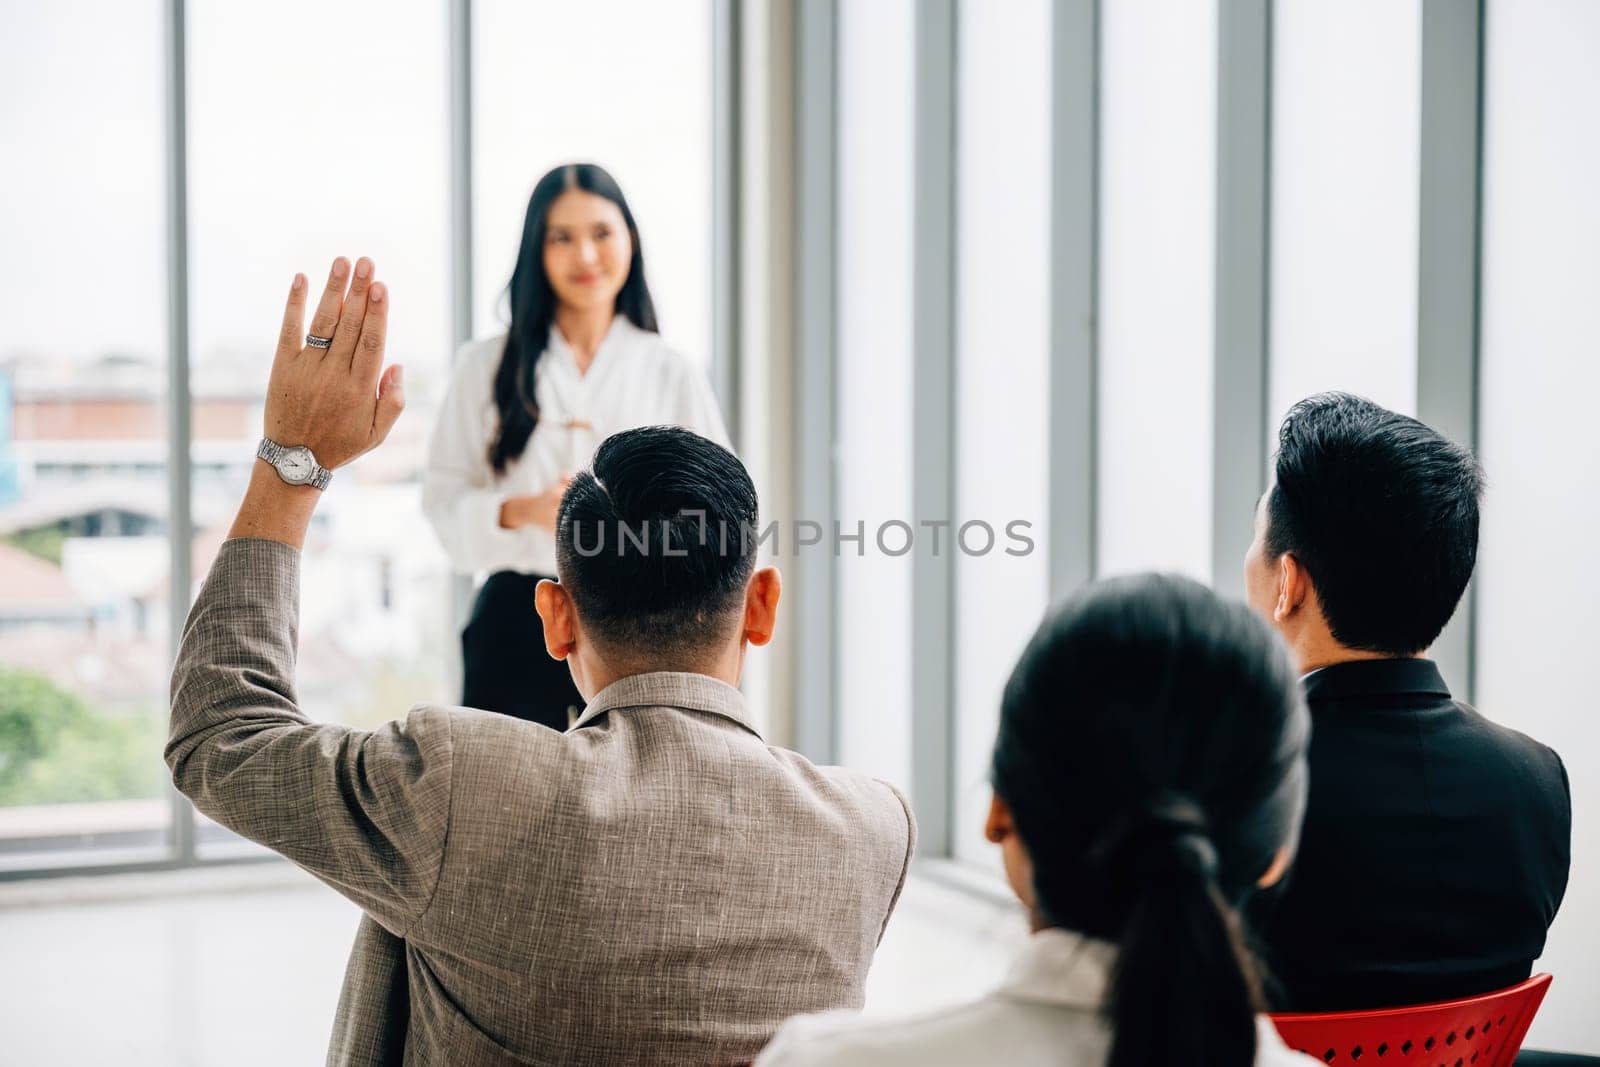 In a seminar classroom, a large group actively participates in the discussion by raising their hands. This dynamic conference audience is brimming with answers. by Sorapop